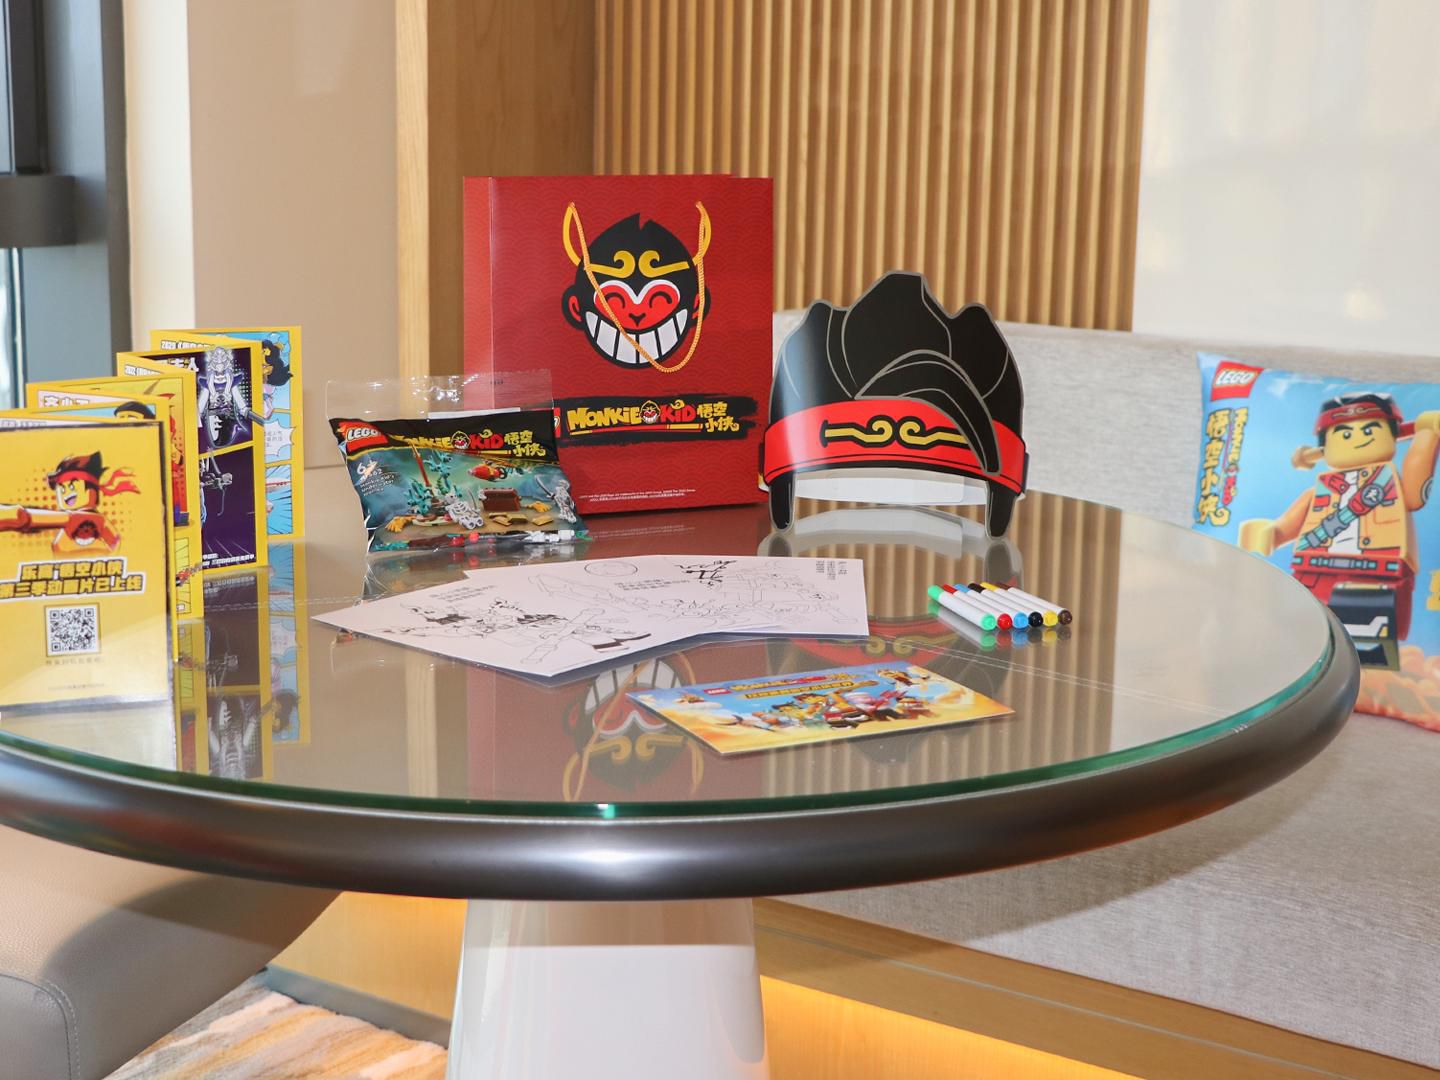 Crowne Plaza X Lego Monkie Package